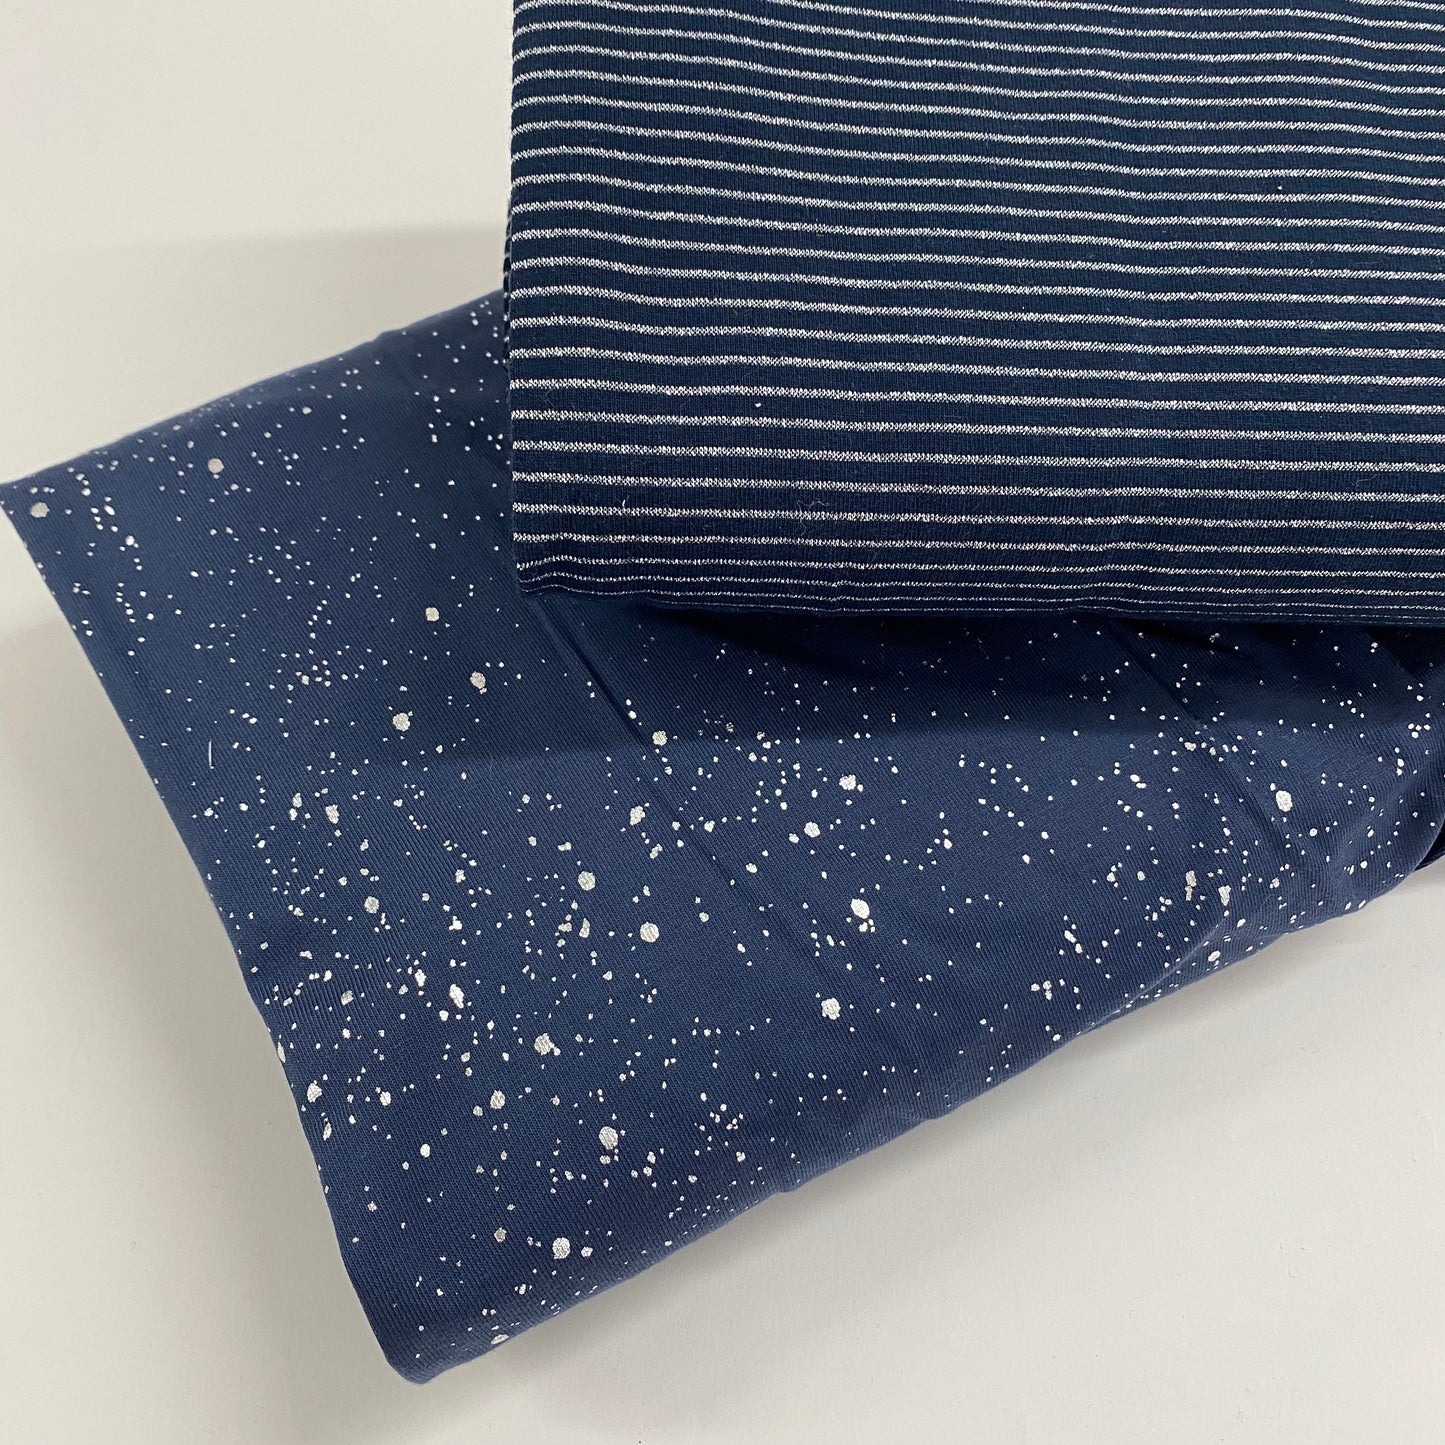 Striped Sparkly Navy Cotton Jersey Fabric